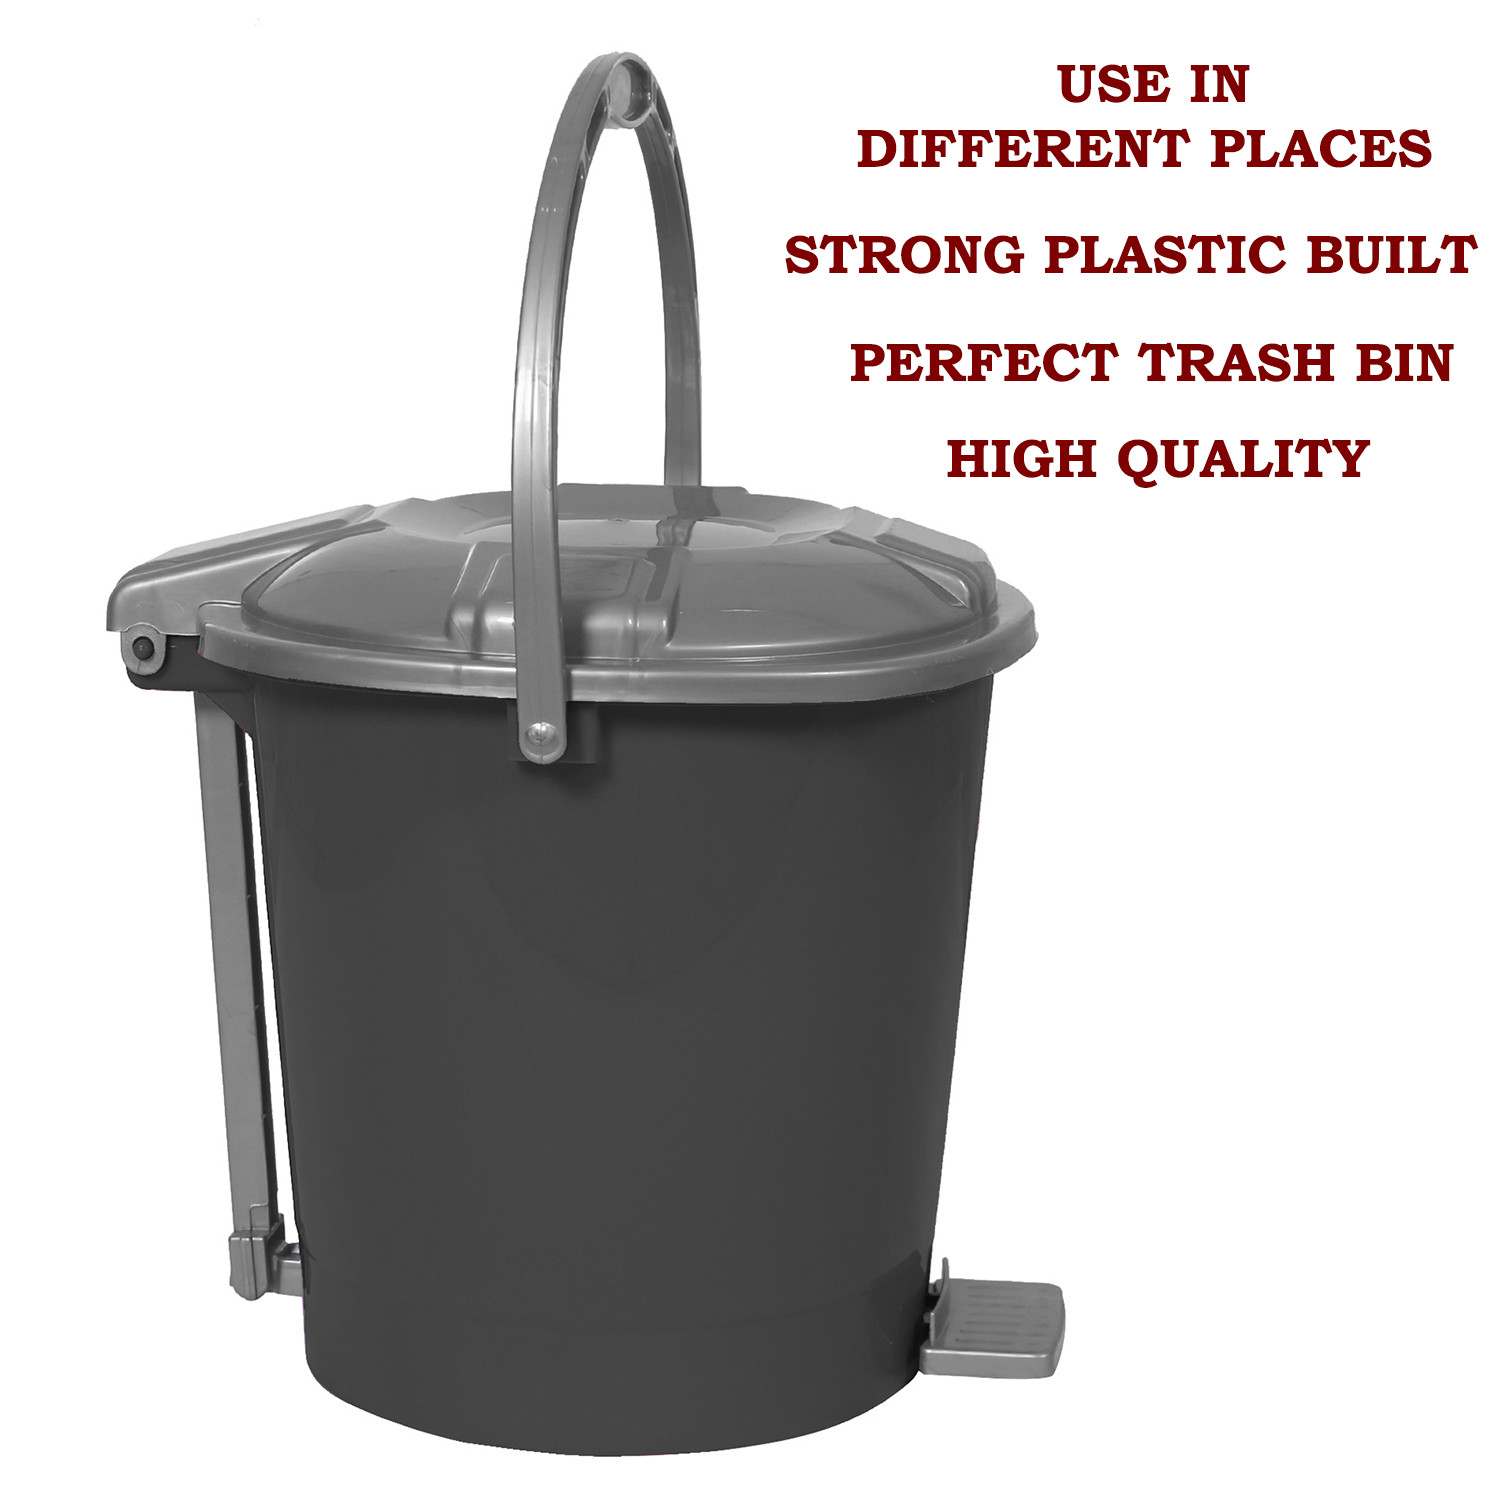 Kuber Industries Durable Plastic Pedal Dustbin|Waste Bin|Trash Can For Kitchen & Home With Handle,10 Litre,Pack of 2 (Gray)